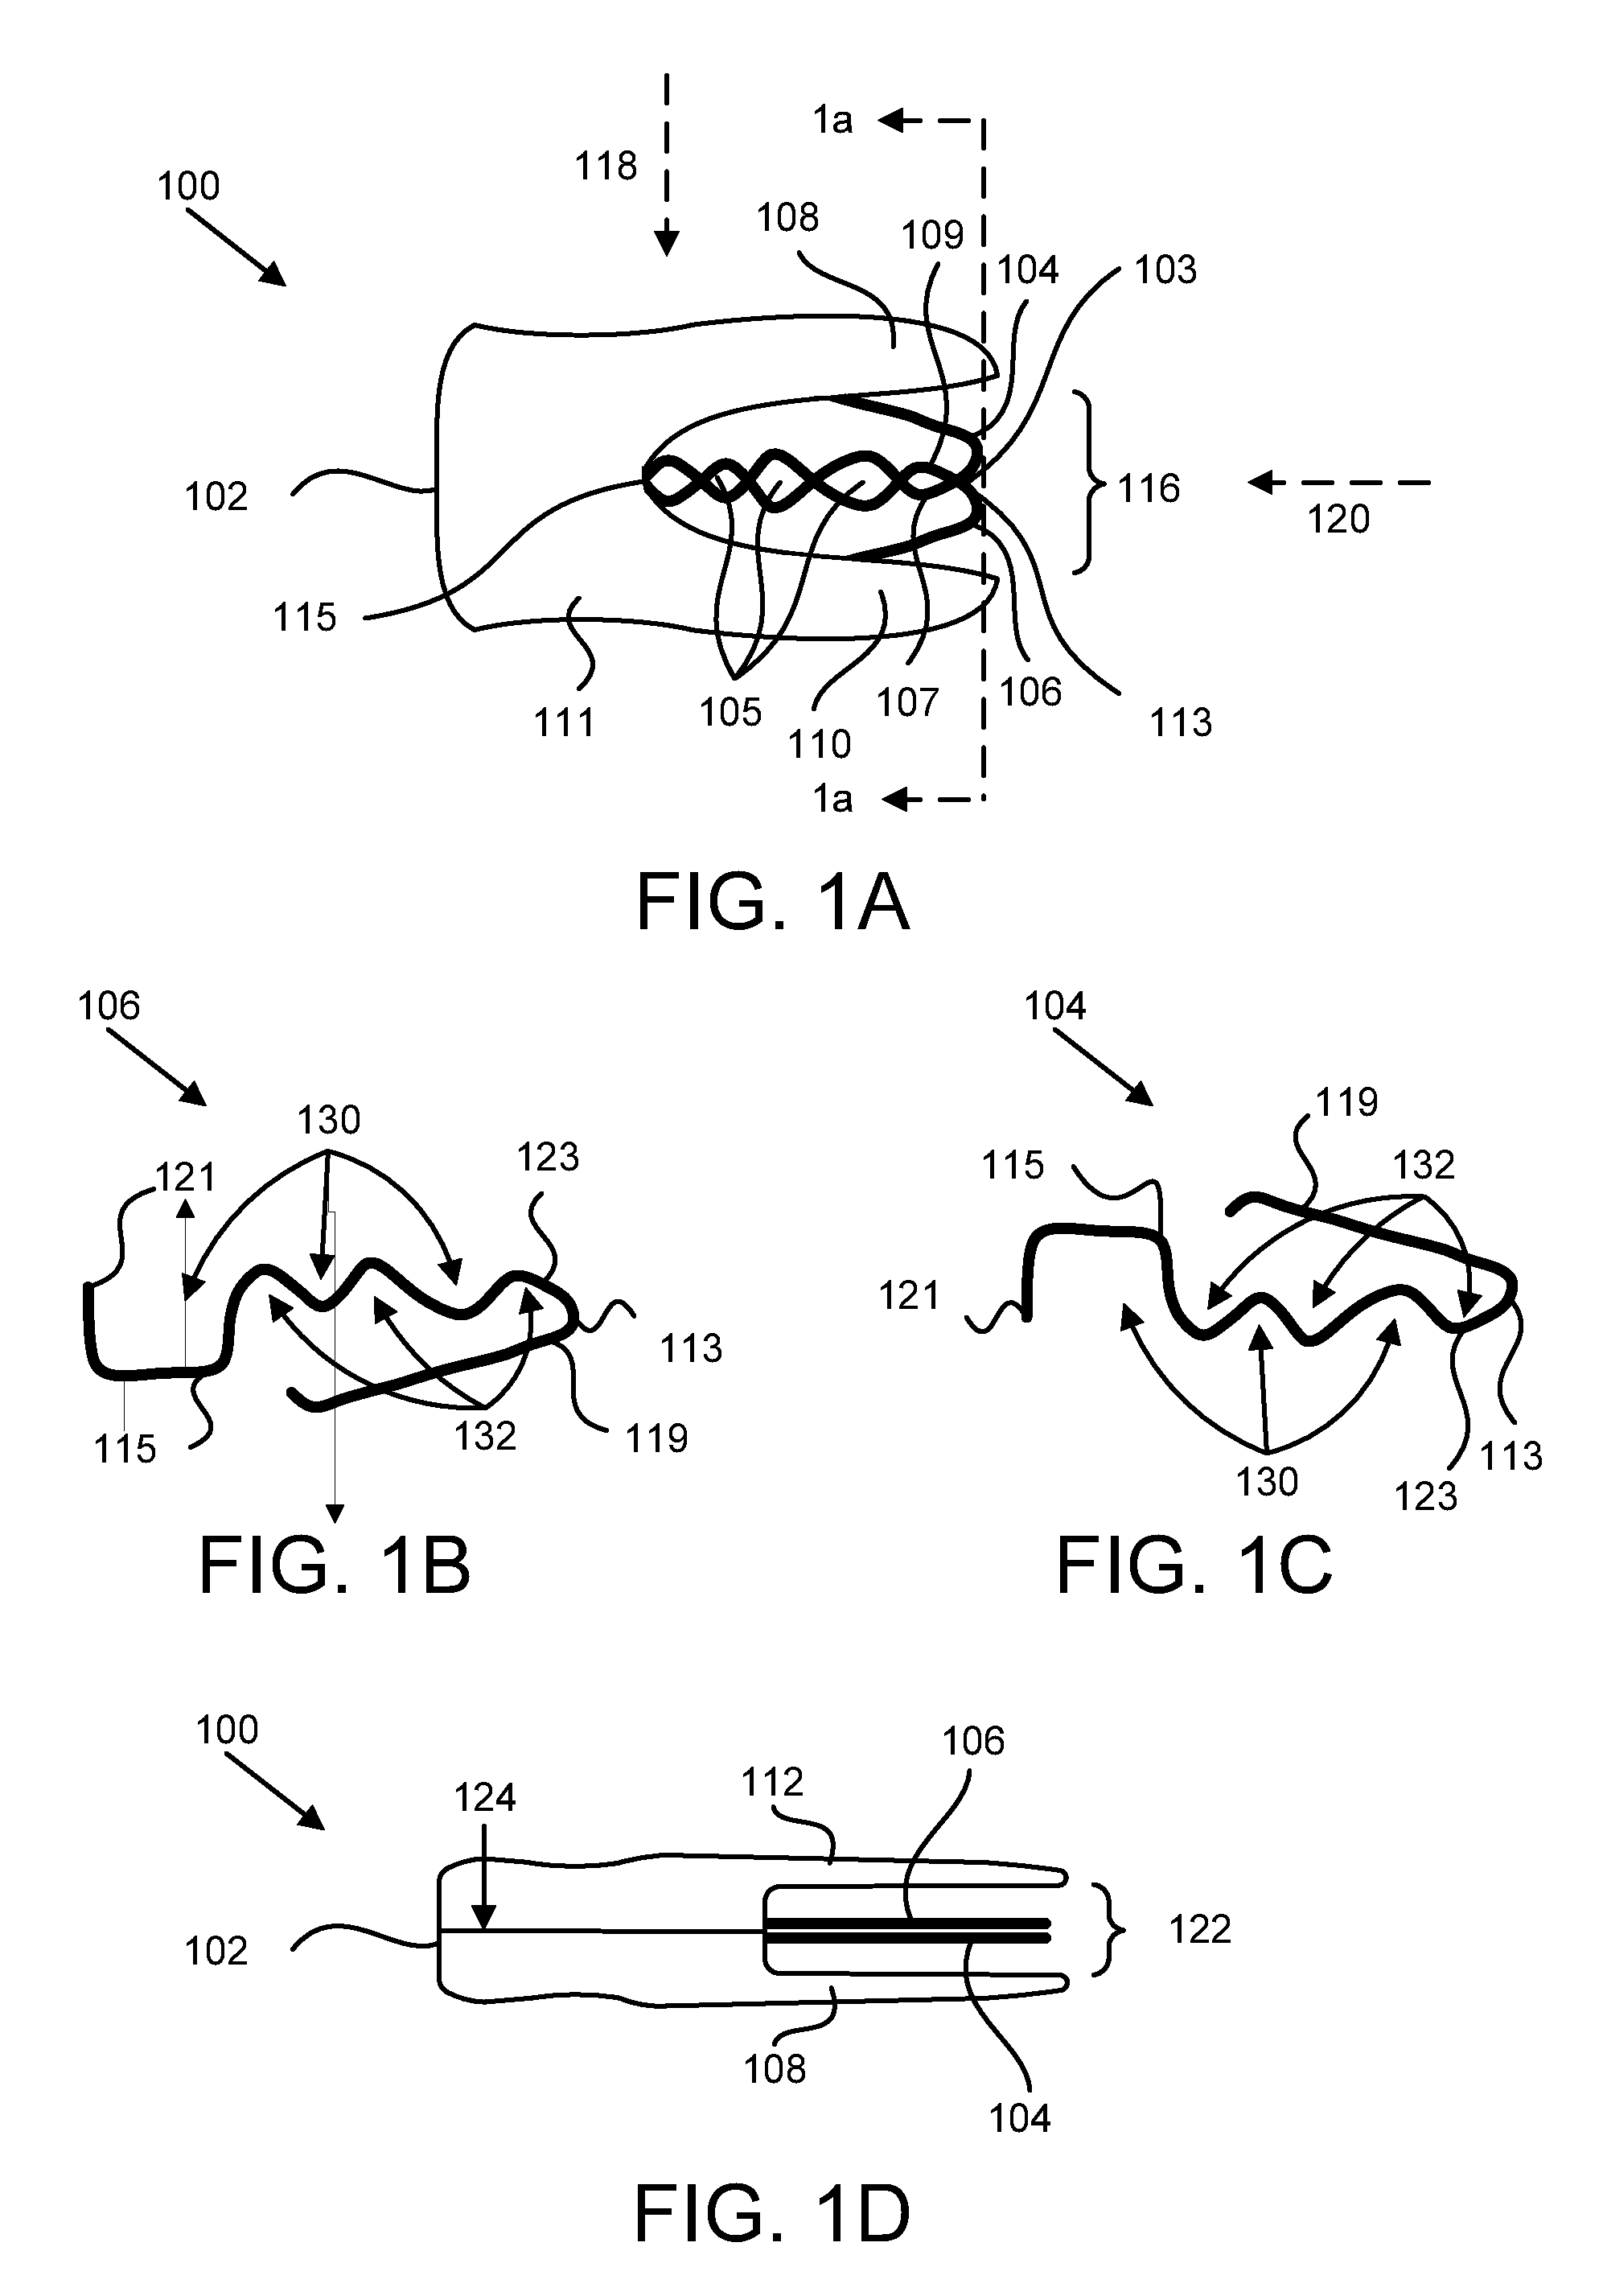 Apparatus, system, and method for creating an electrical connection to a tool